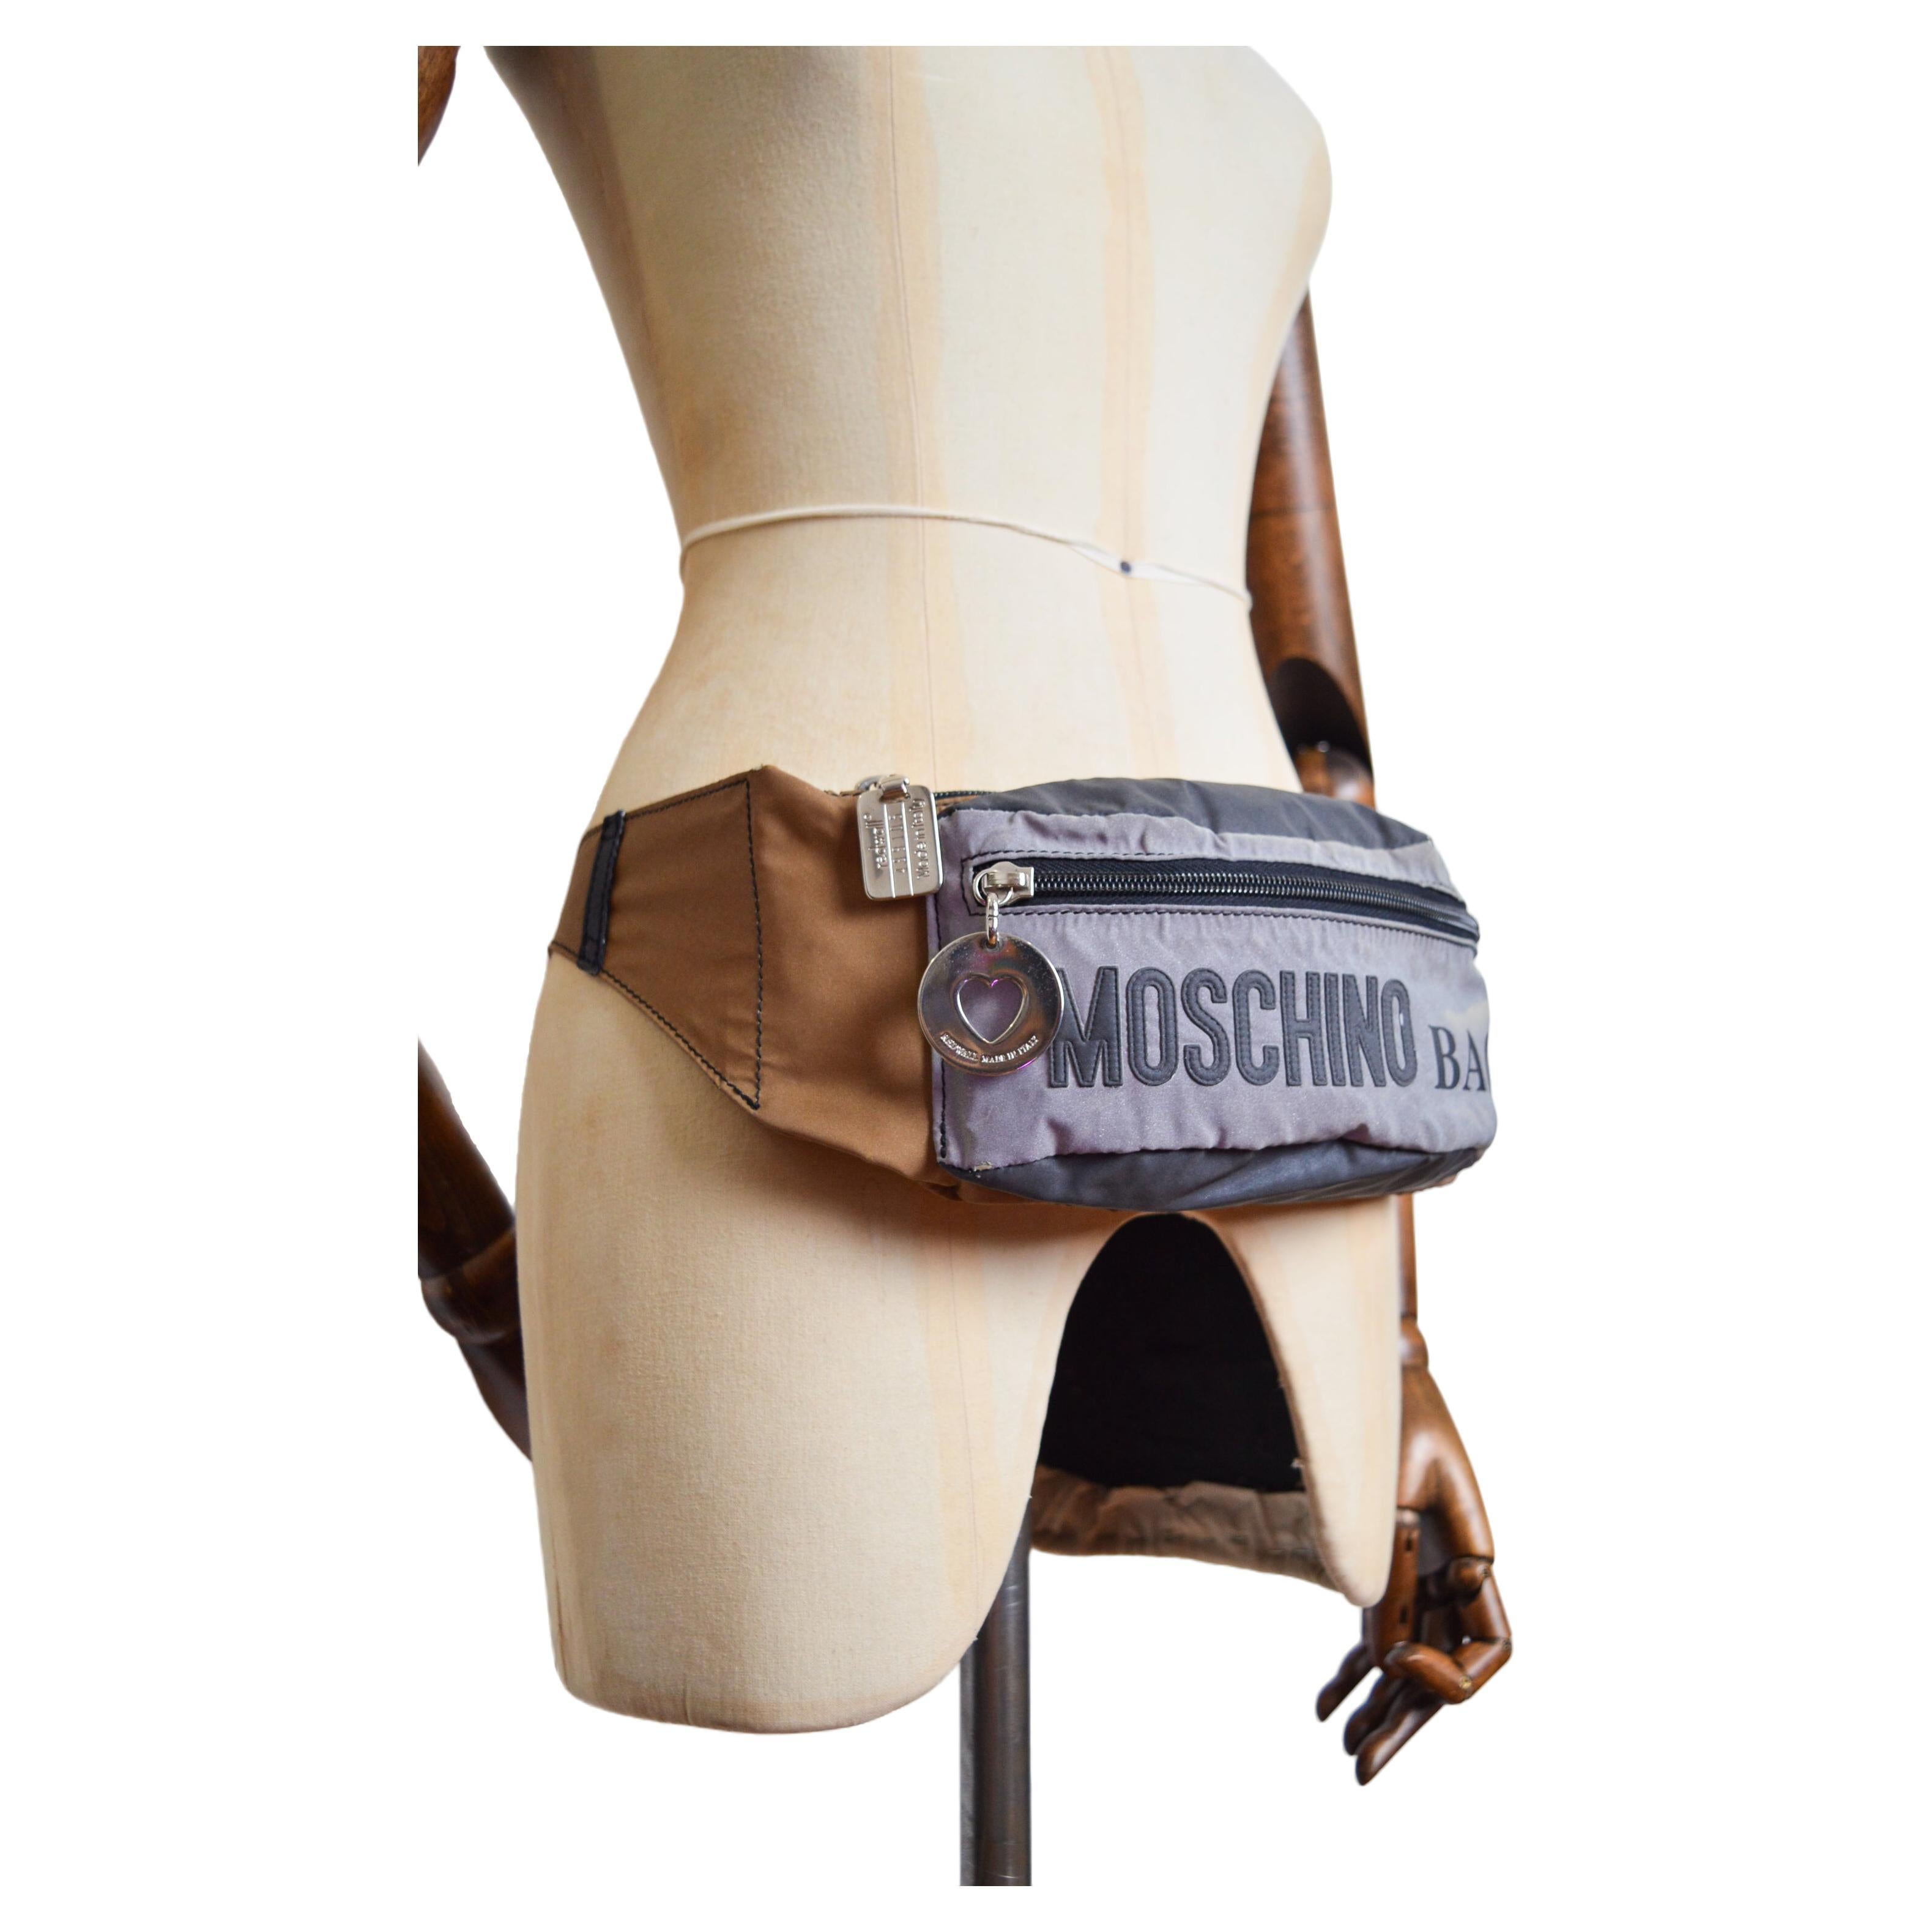 Vintage 1990's Moschino reflective Gold & Silver fanny pack / bum bag, with iconic & large 'MOSCHINO' lettering and silver metal hardware. 

An Iconic Vintage Piece !   

MADE IN ITALY   

Features: Large 'MOSCHINO' spellout letters, Single Zip